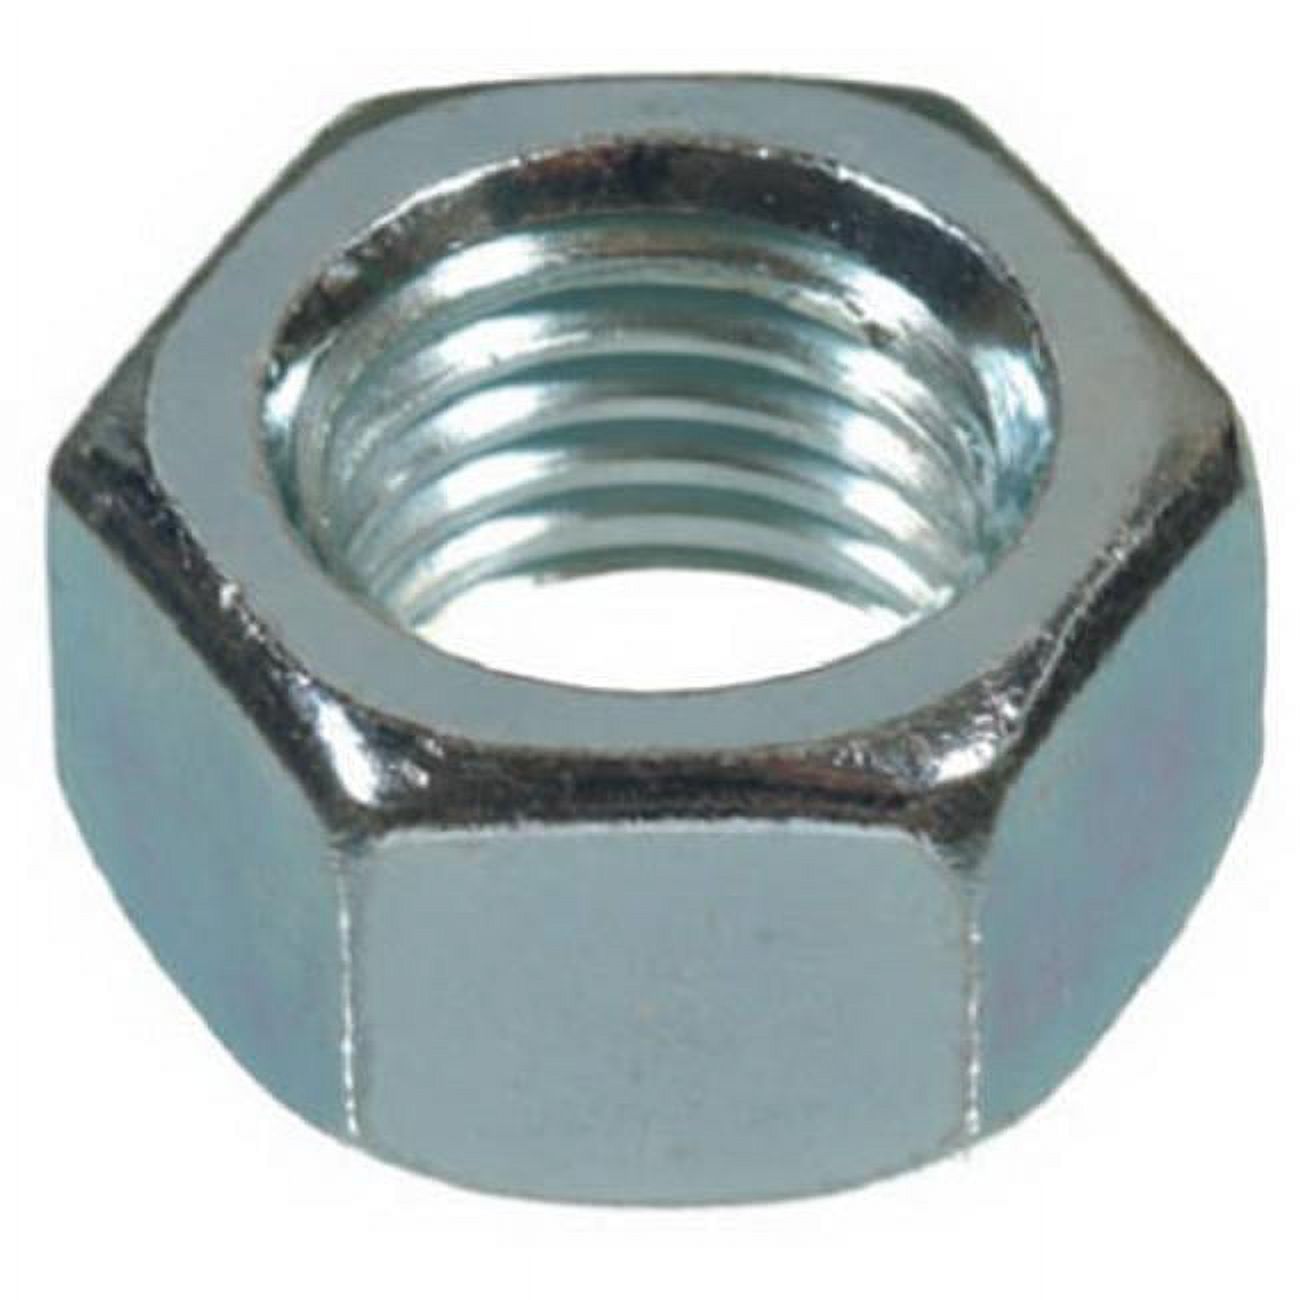 Hillman Fasteners 150003 0.25-20 Coarse Thread Zinc Plated Steel Hex Nut- 100 Pack - image 1 of 1